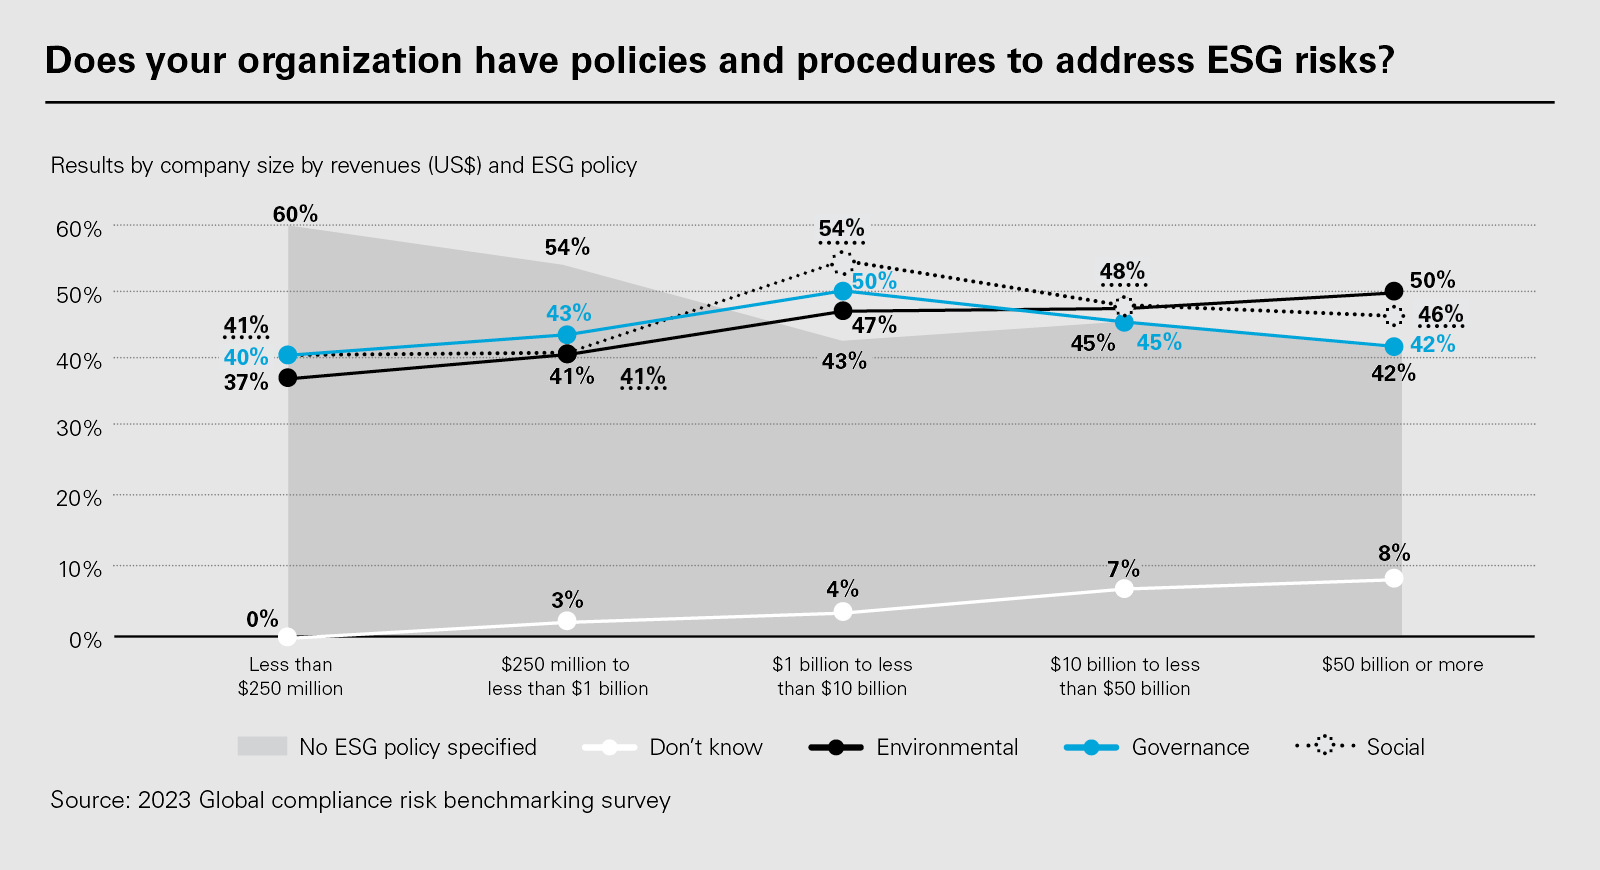 Does your organization have policies and procedures to address ESG risks?